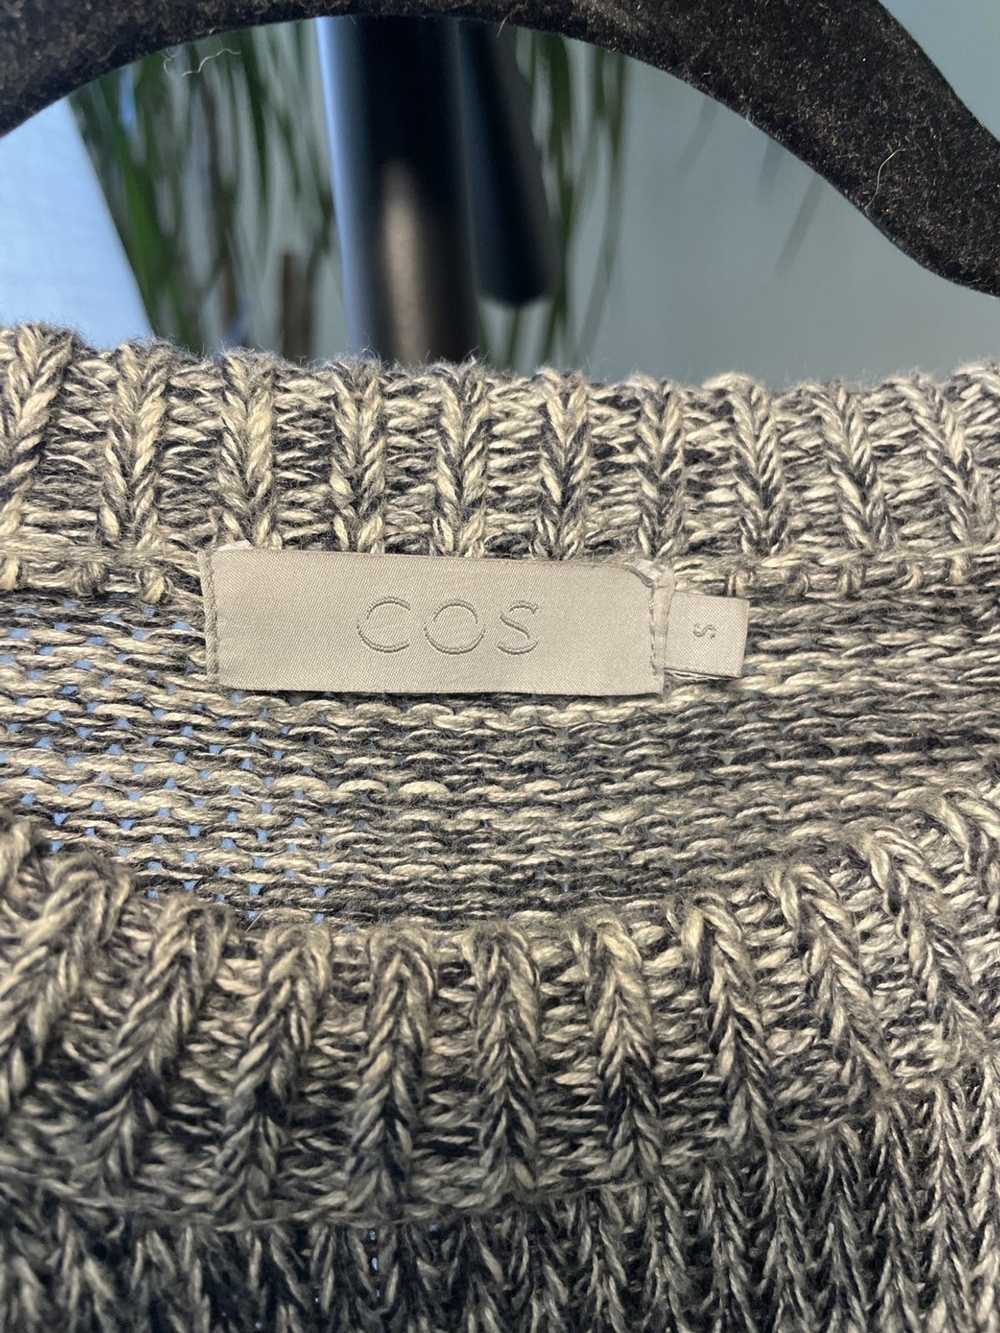 Cos Marled Grey Knit Sweater - image 2